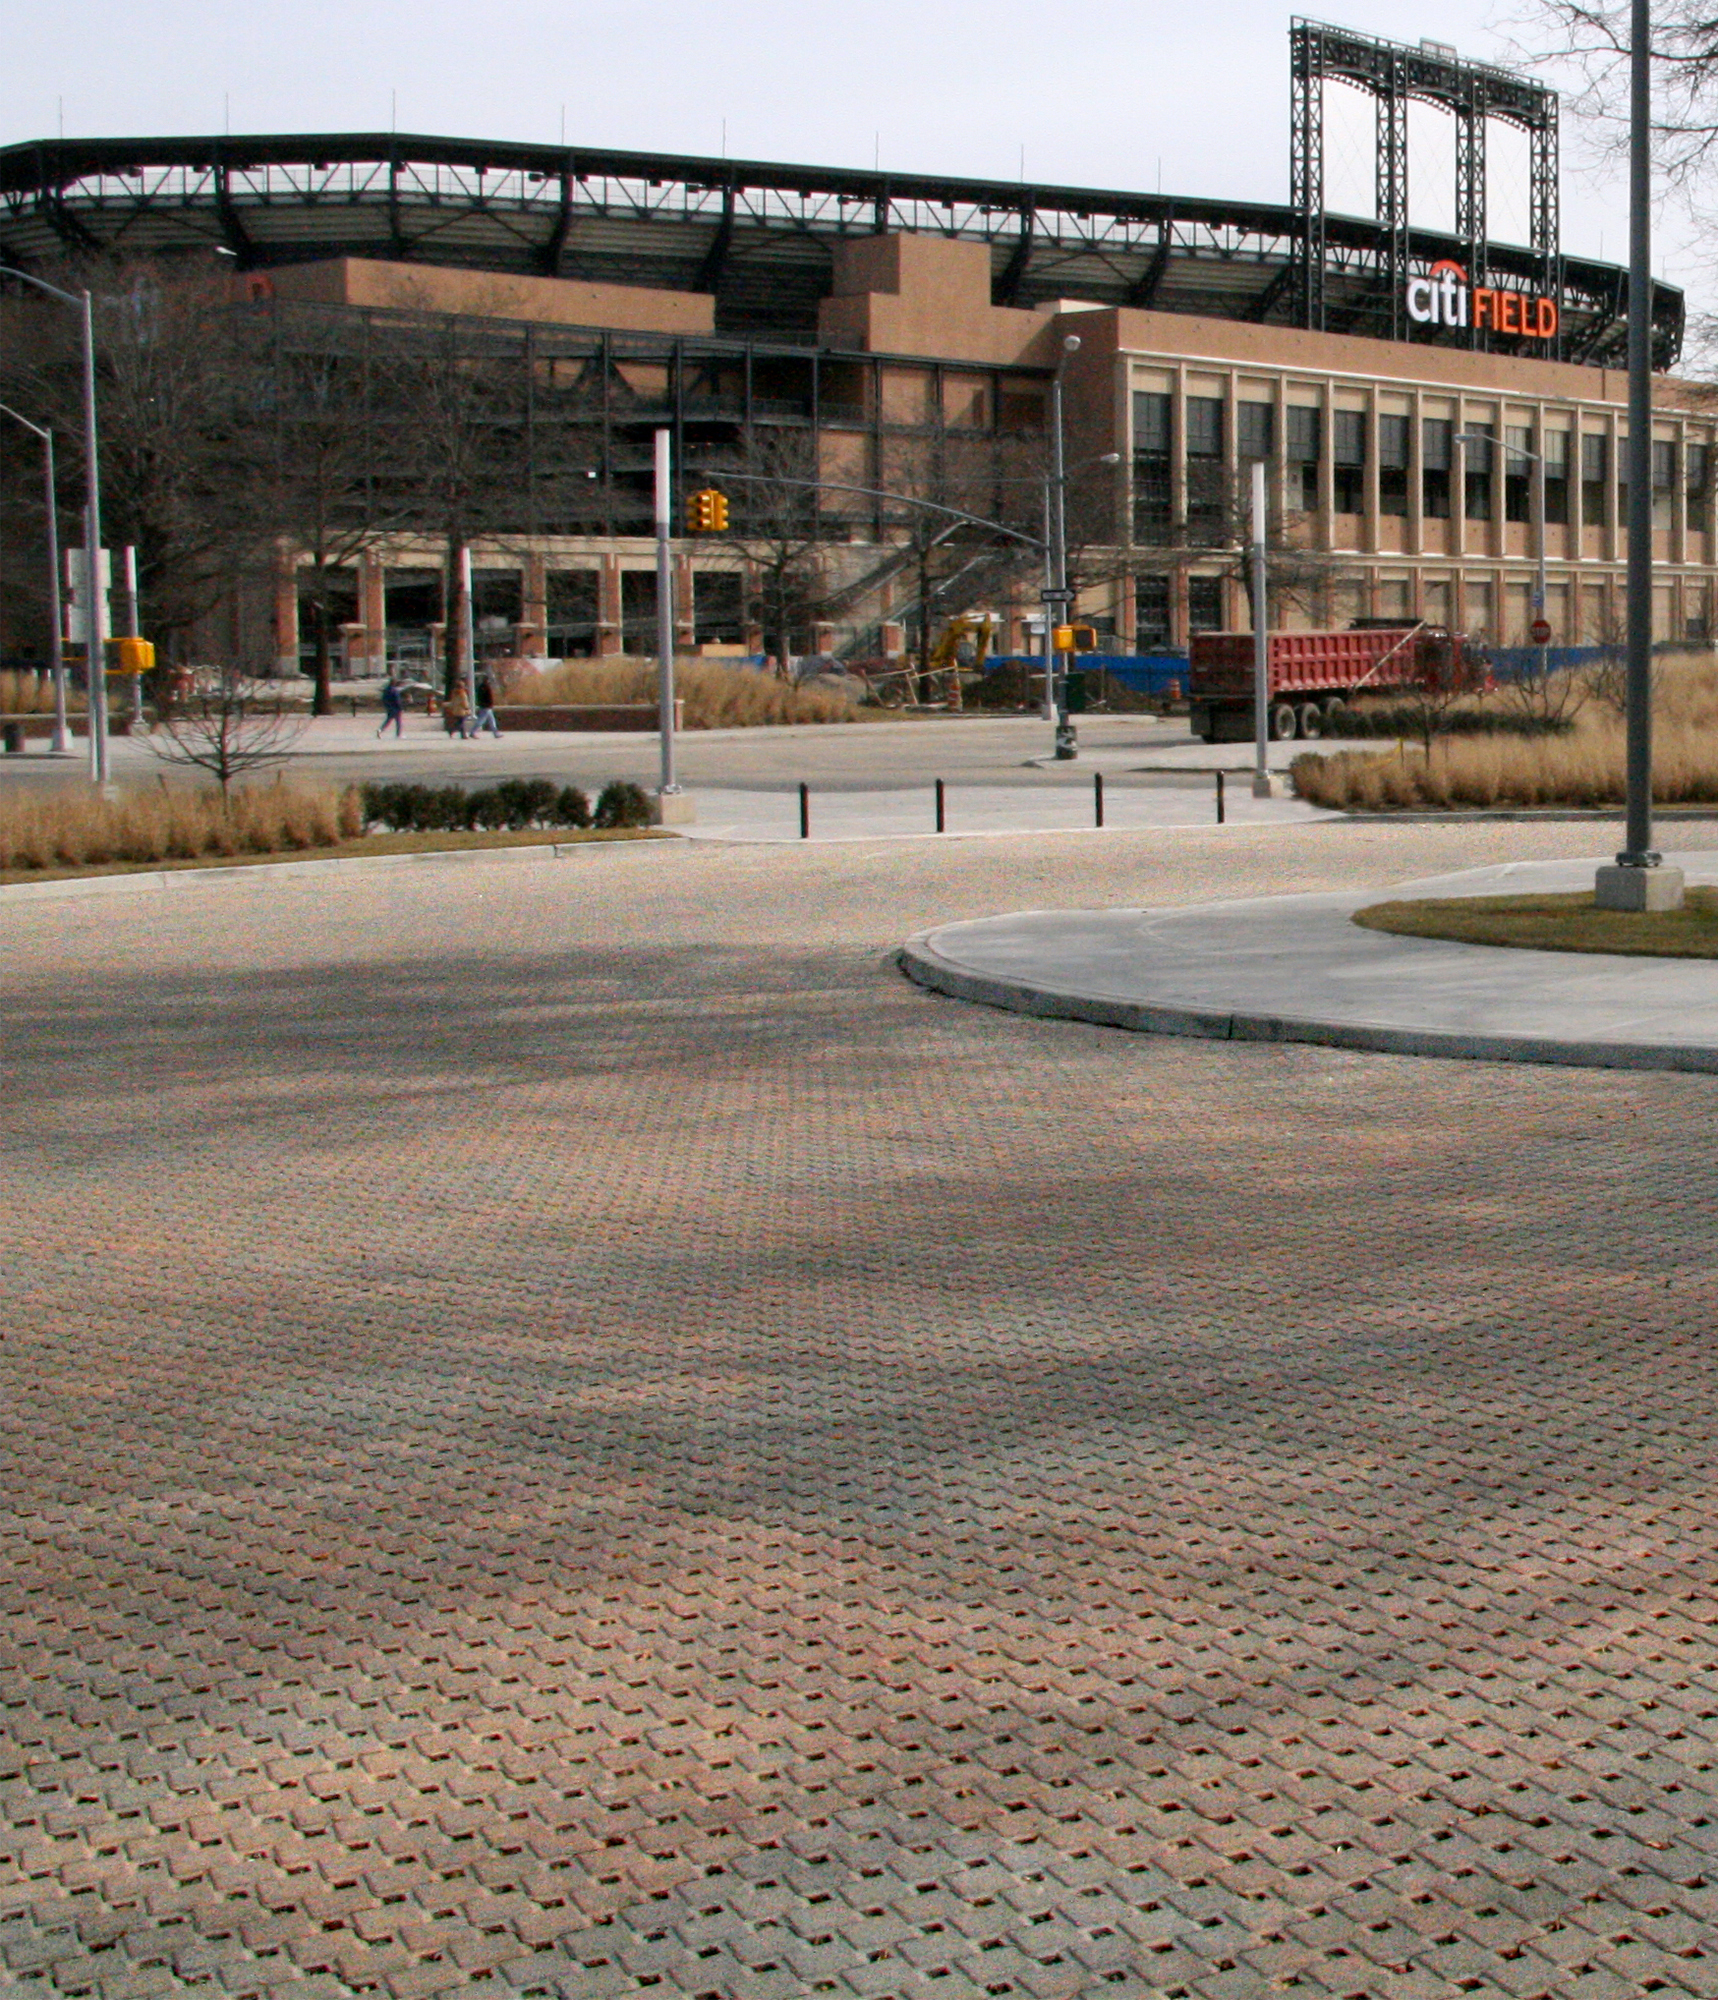 Ecoloc pavers in a reddish-blue hue is used in the parking lot outside City Field Met Stadium, matching the color tone of the building.